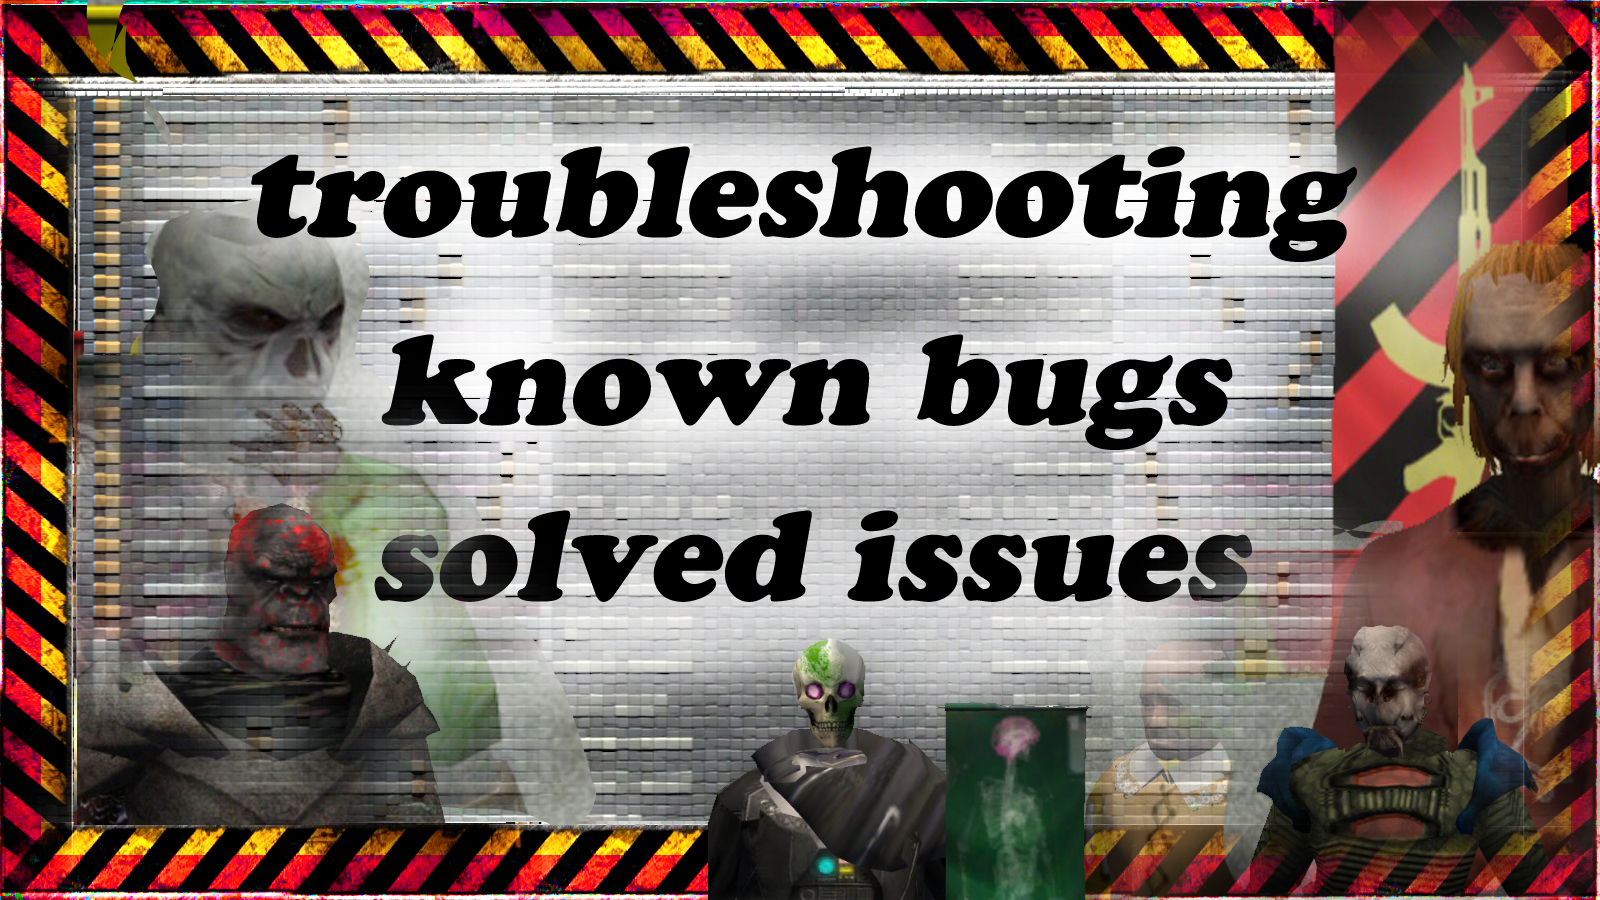 troubleshooters